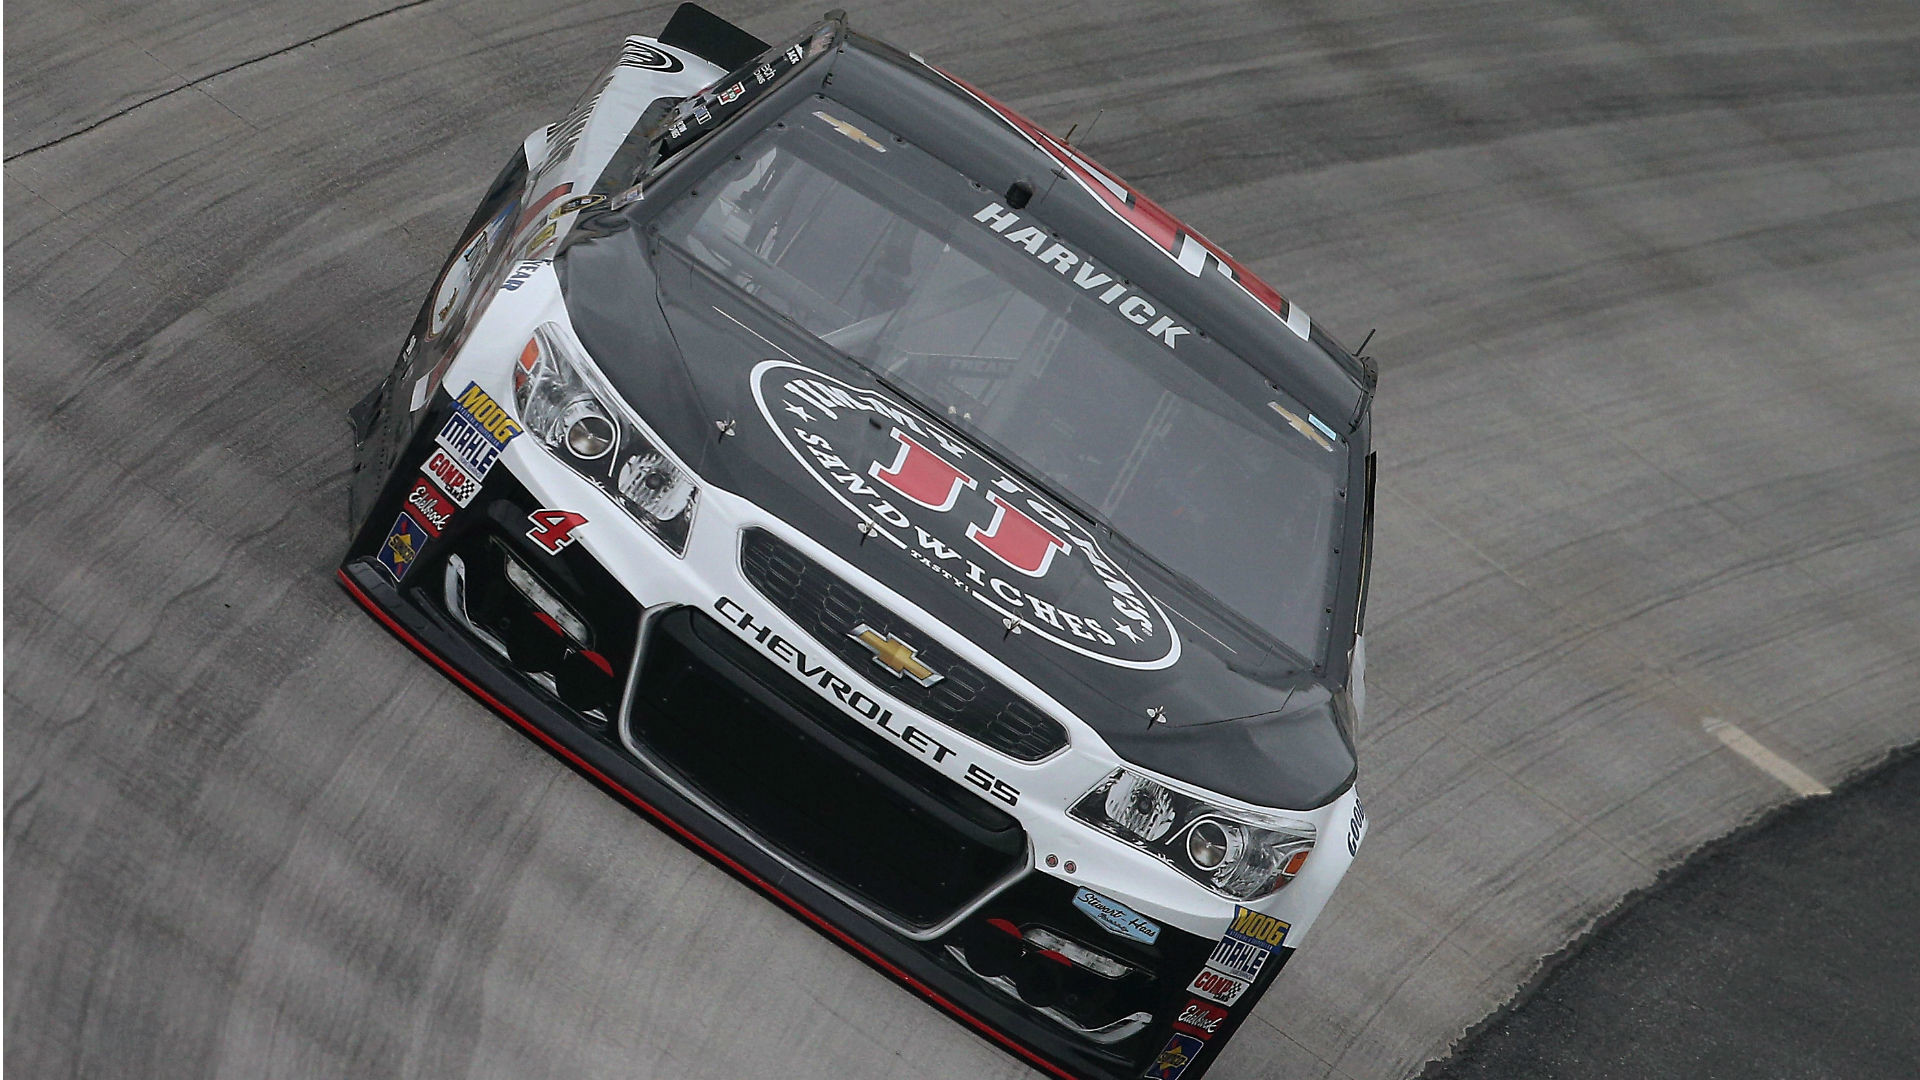 1920x1080 NASCAR starting lineup at Texas: Kevin Harvick on pole as contenders miss  qualifying